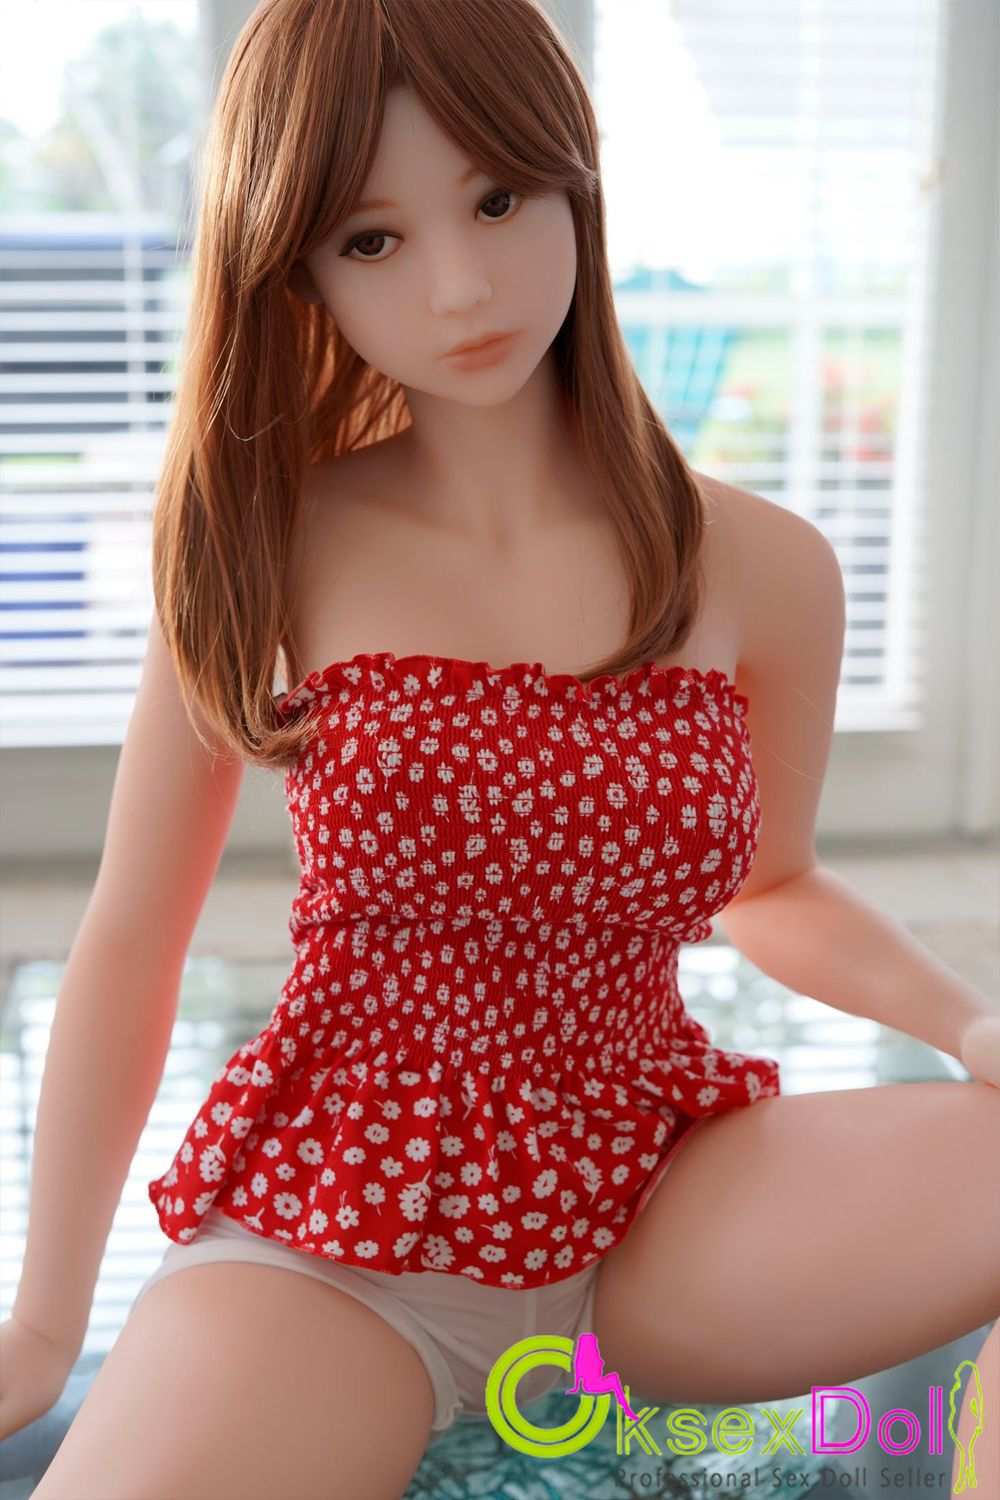 Dollforever 145cm Love Doll Pictures